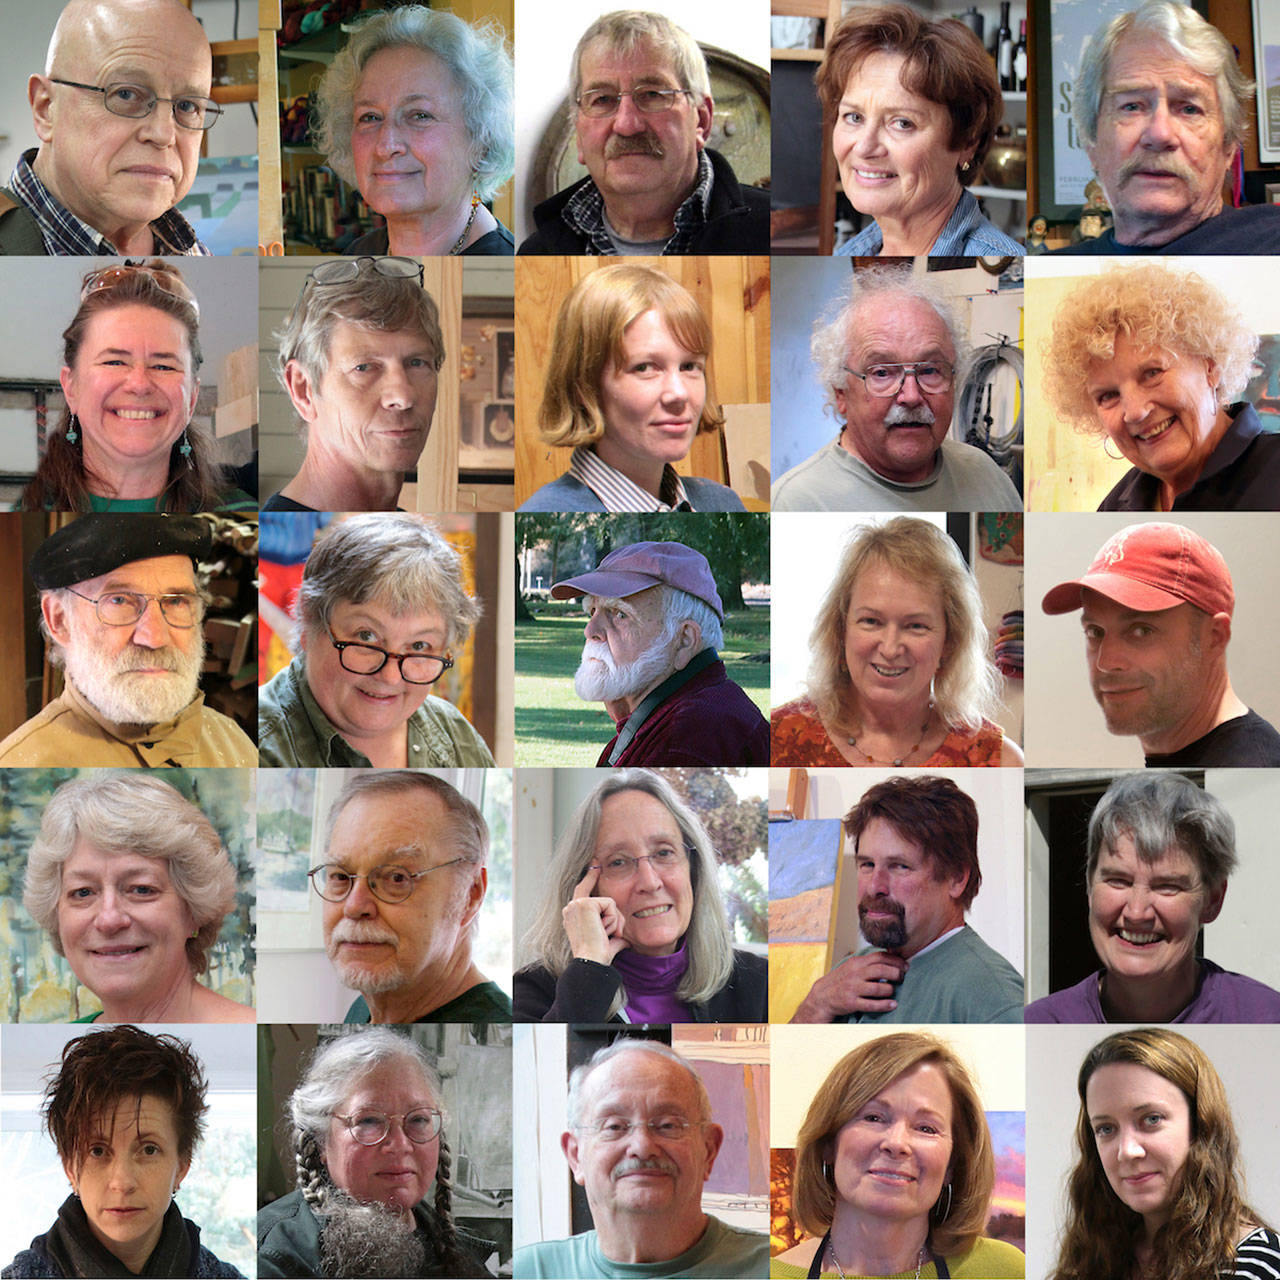 The back cover displays head shots of all 25 artists featured in the new book, “Artists of Whidbey Island: Vision, Space, Work, Resolution” by Don Wodjenski.